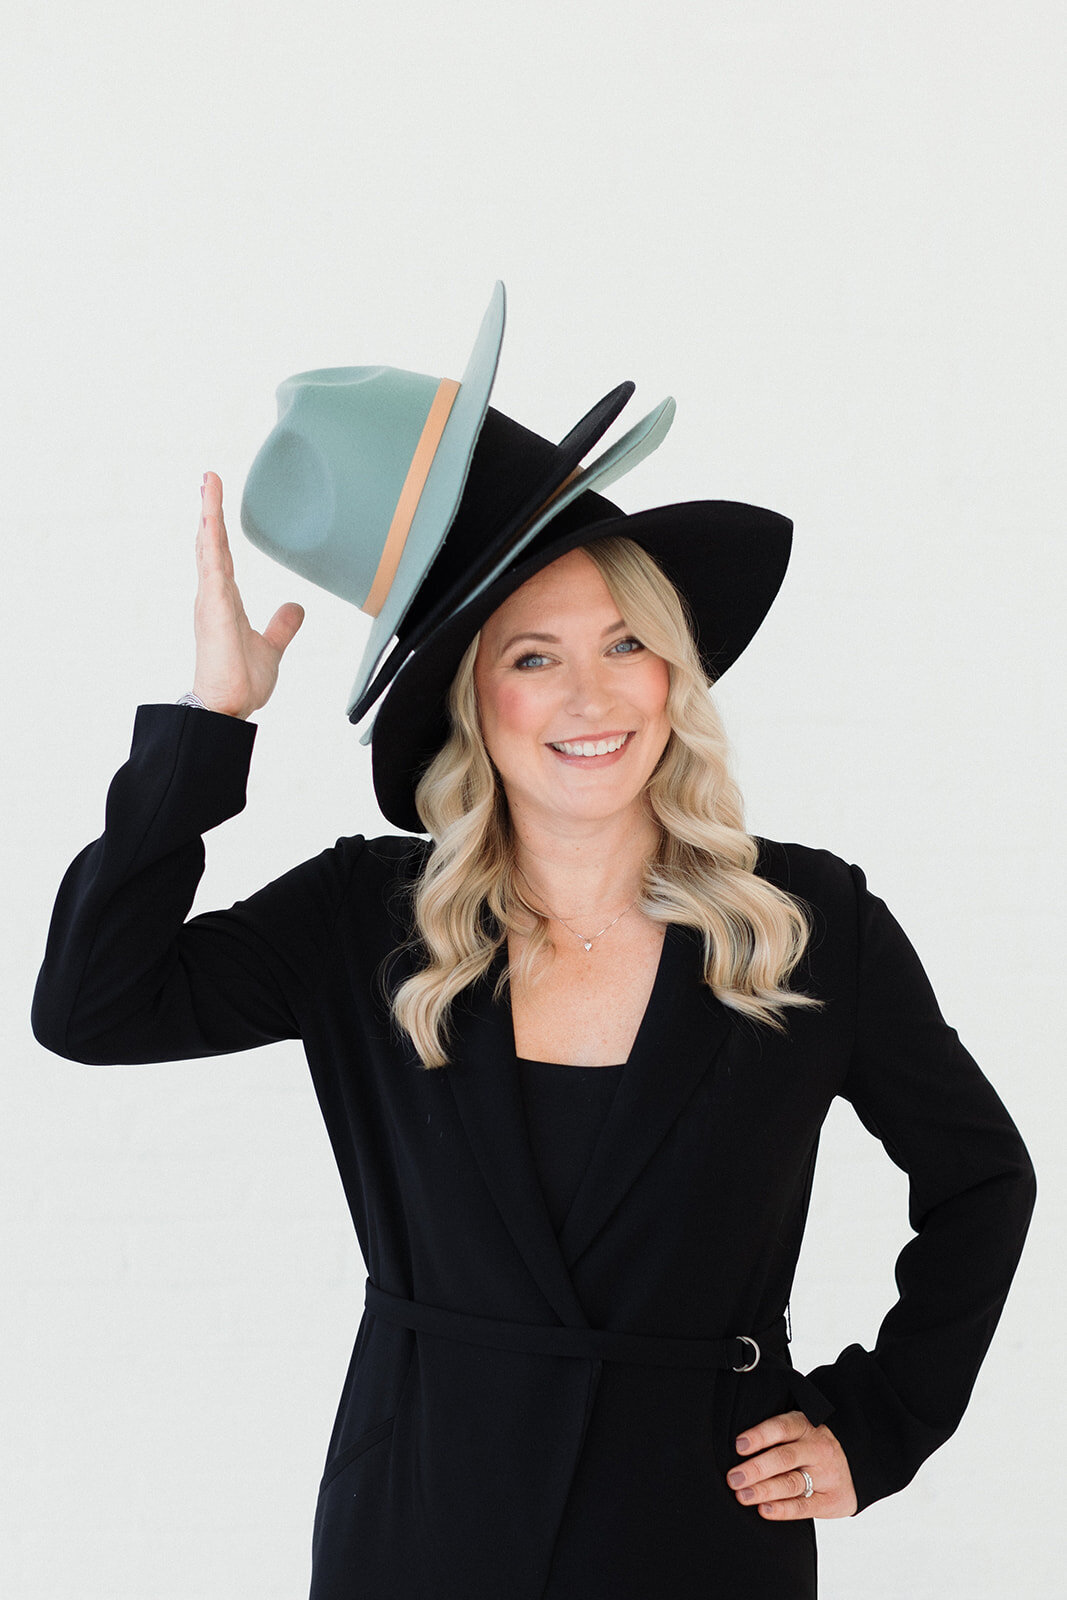 blonde woman has a pile of hats on her head and she is trying to keep them from falling off. She wears a black suit in front of a white backdrop.